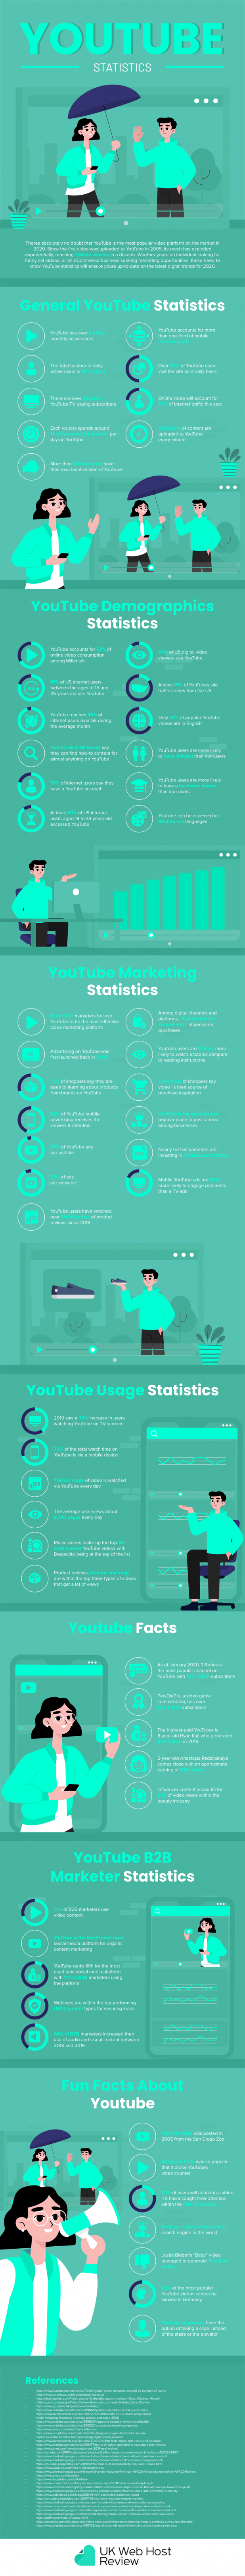 YouTube Statistics: Demographics and Facts [Infographic]
